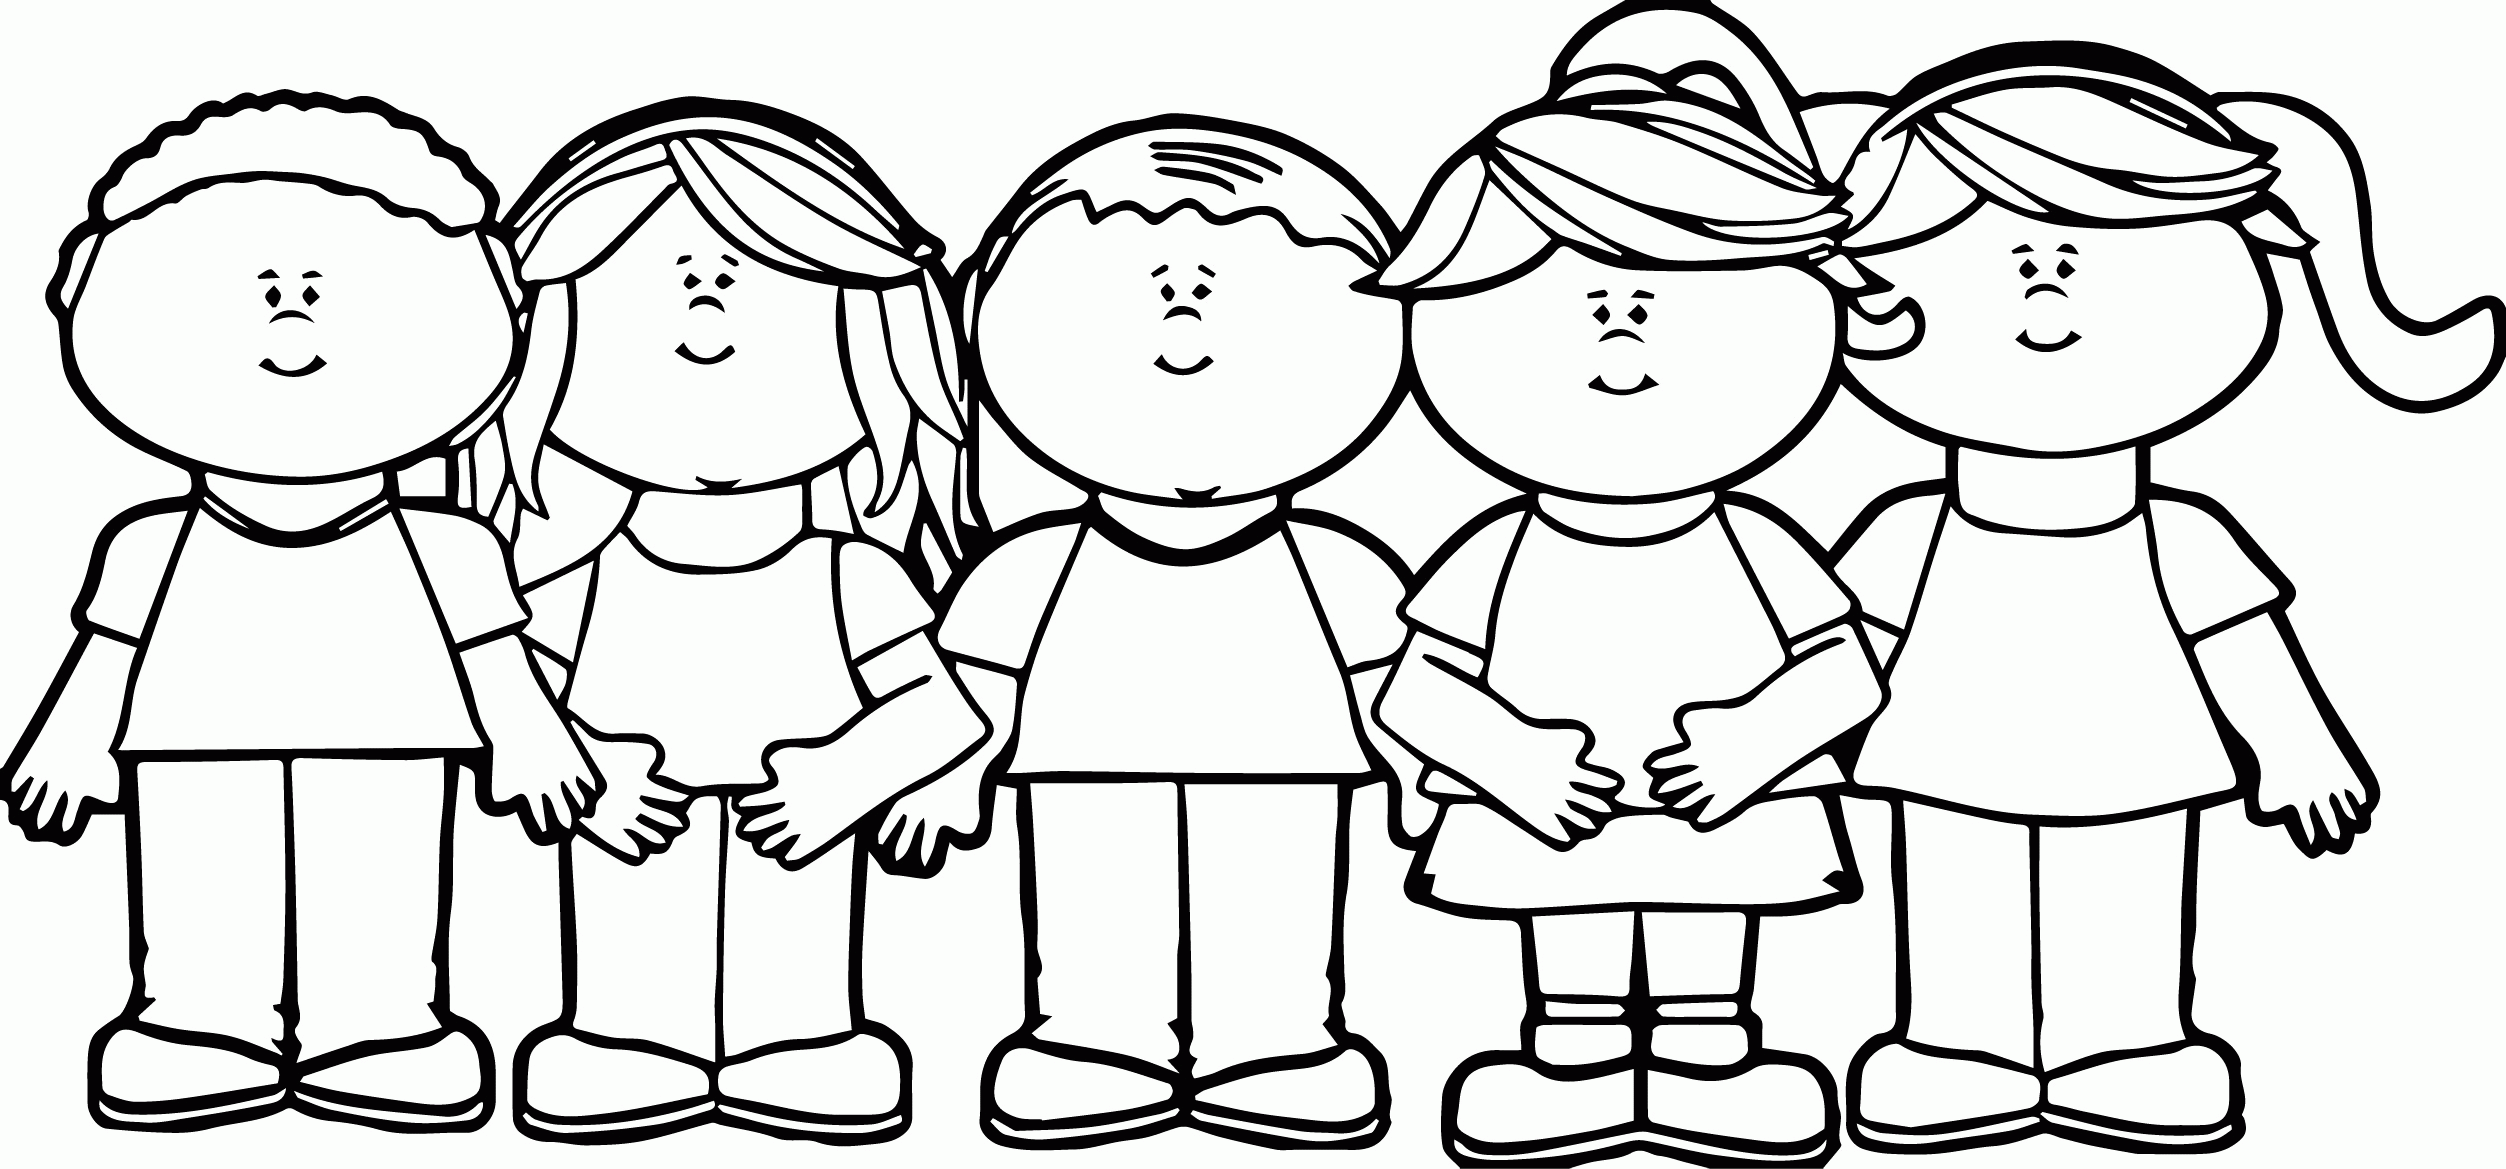 Children Happy Kids We Coloring Page | Wecoloringpage